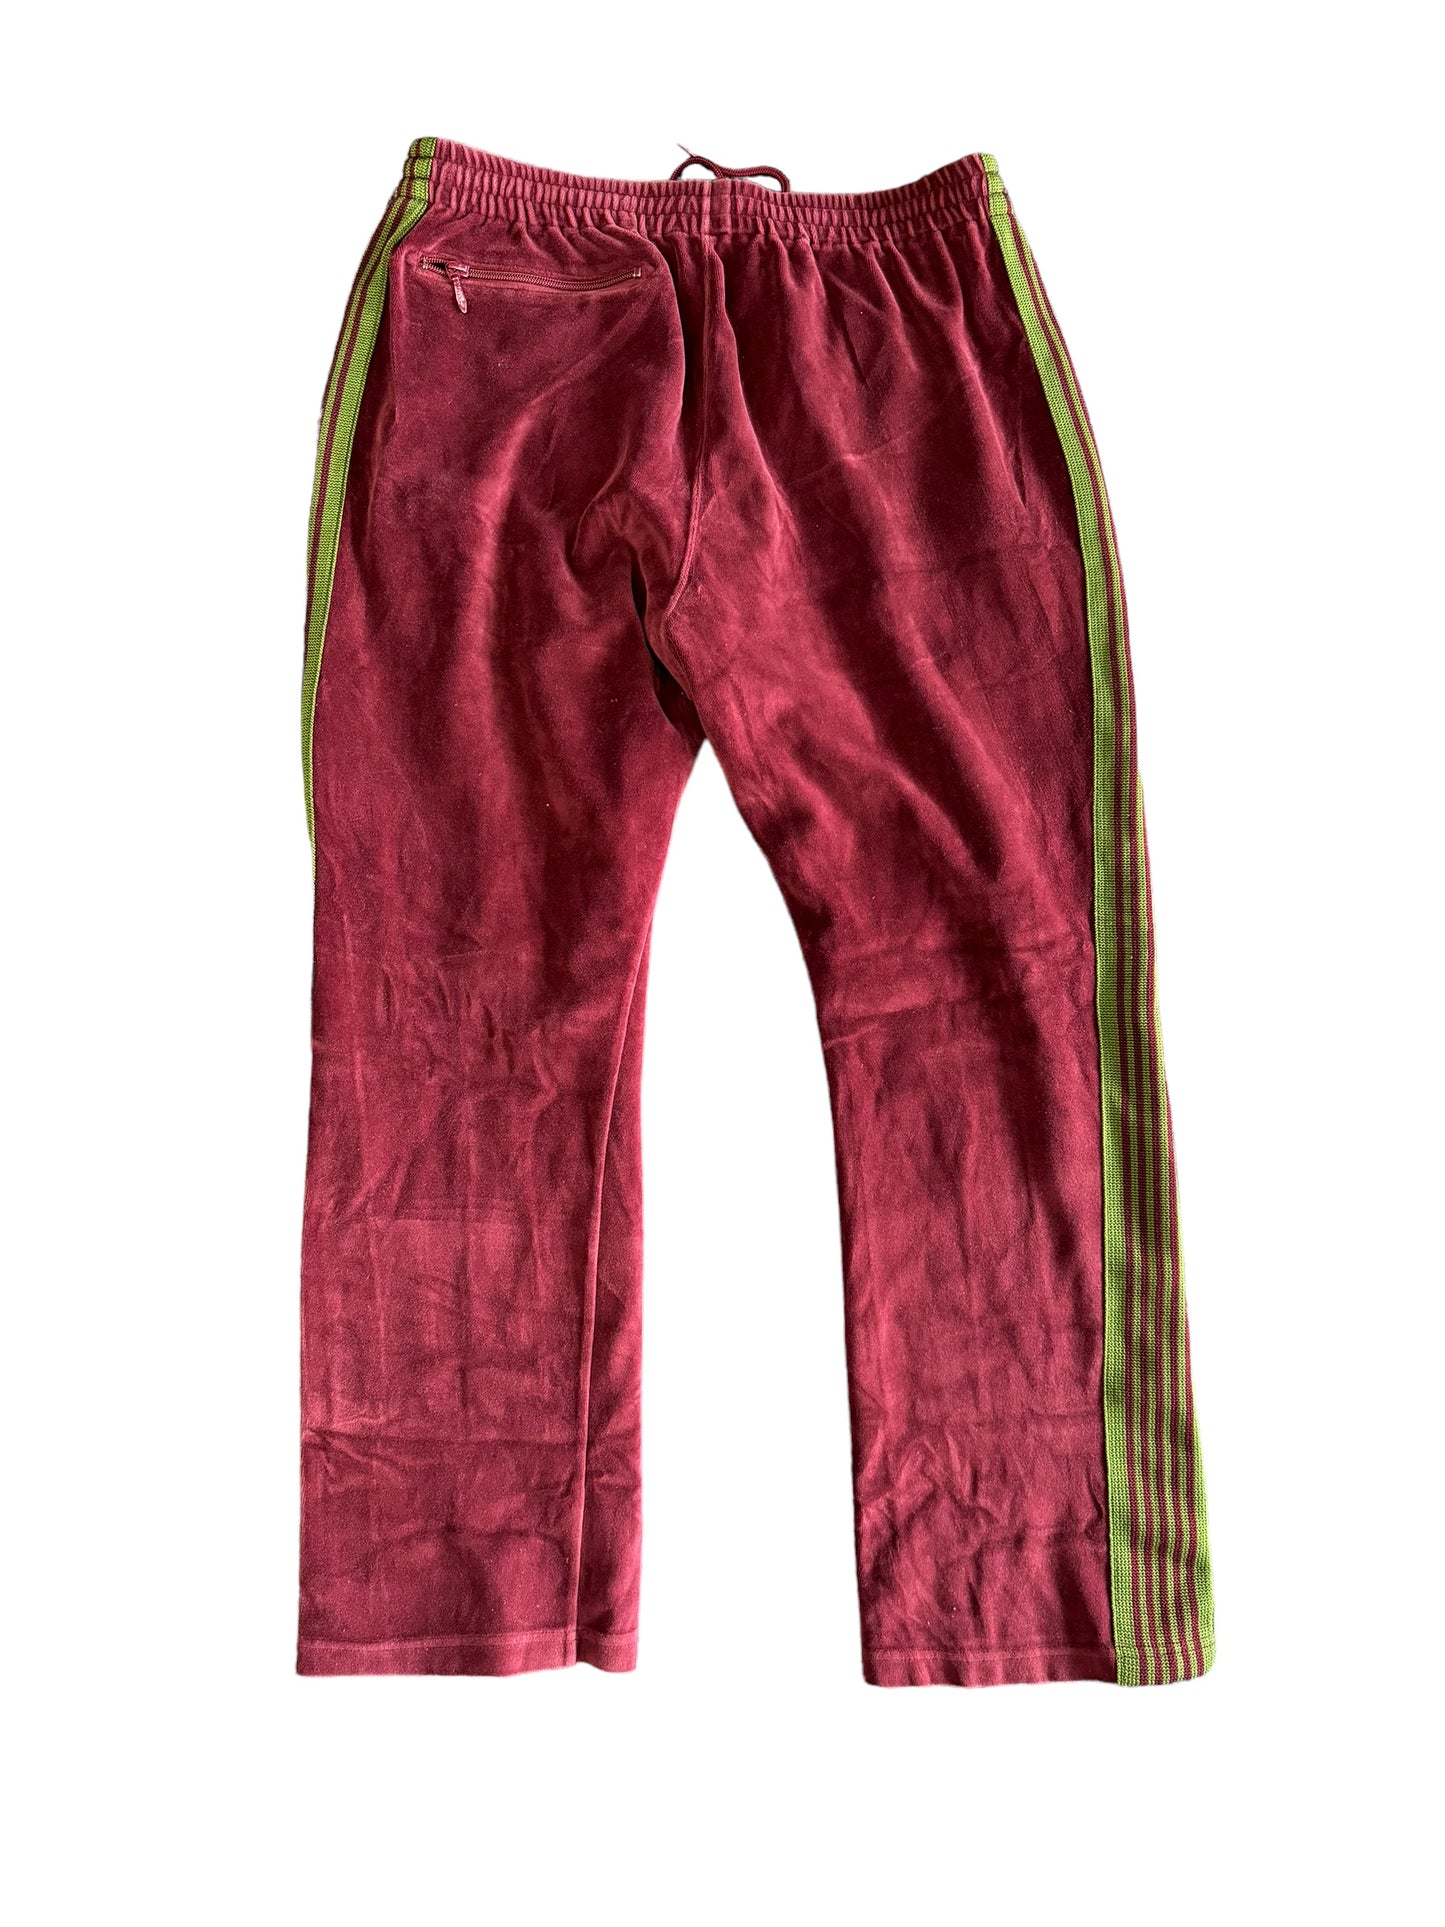 Needles Velour Track pants Burgundy/ Green Size L Pre-Owned